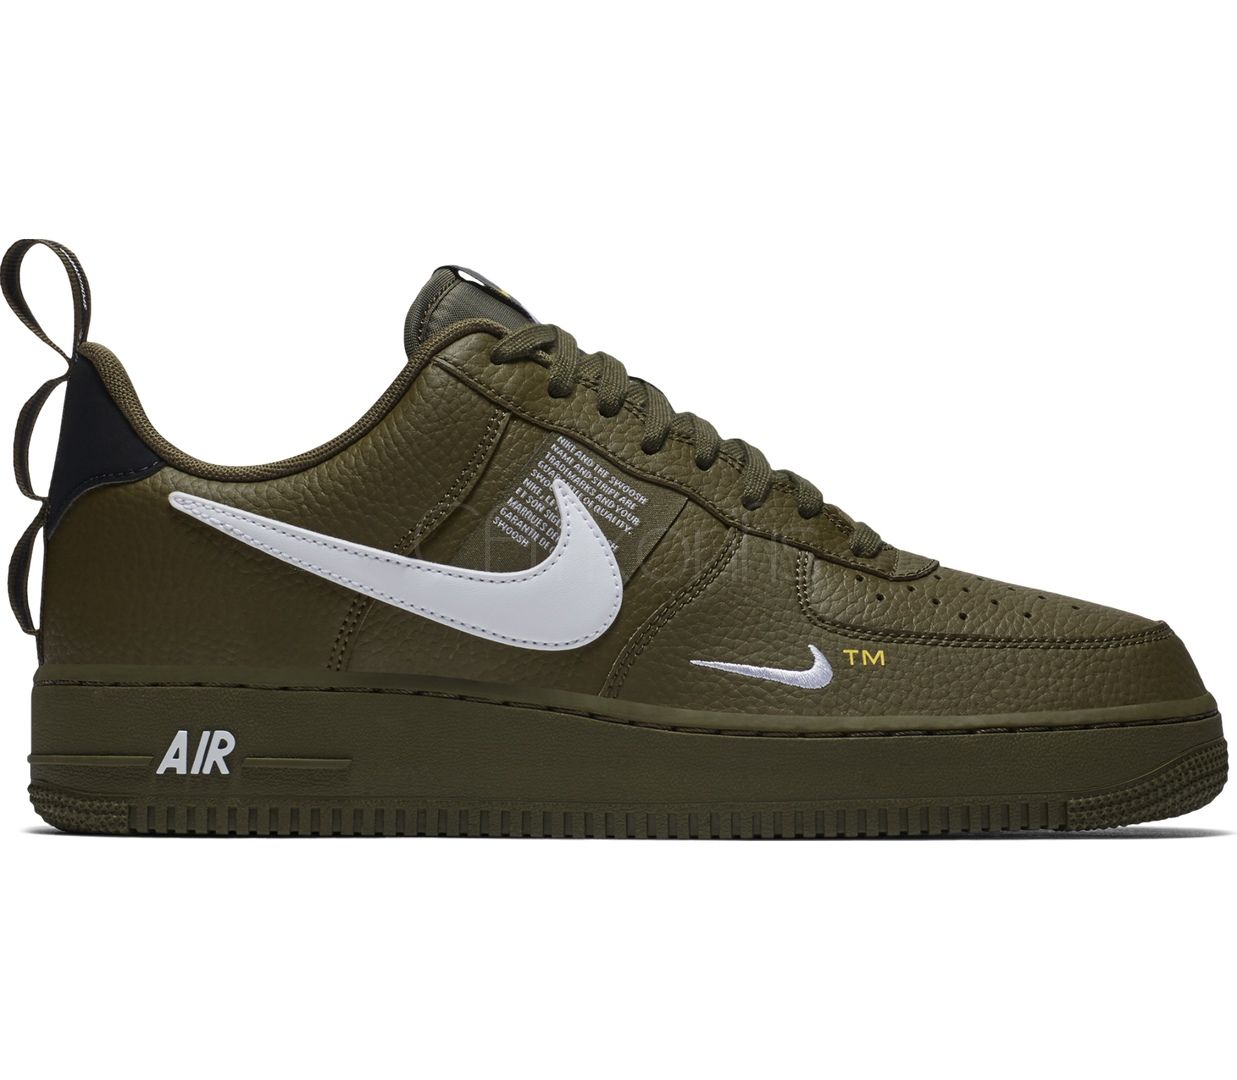 air force lv8 utility olive